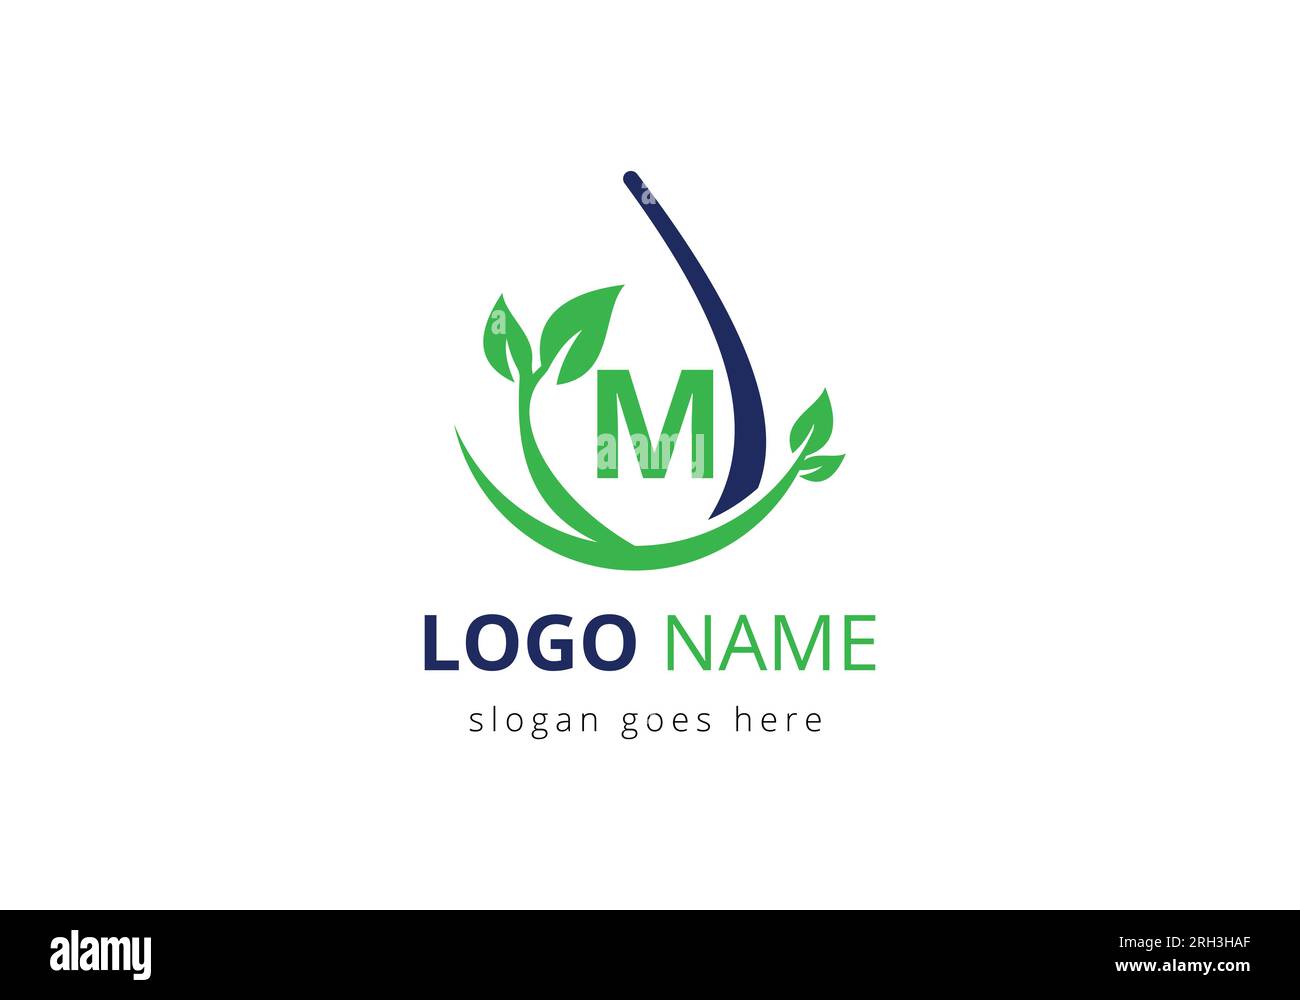 Agriculture Logo On M Letter Concept. Agriculture and farming logo design. Agribusiness, Eco-farm logo Design Vector template Stock Vector